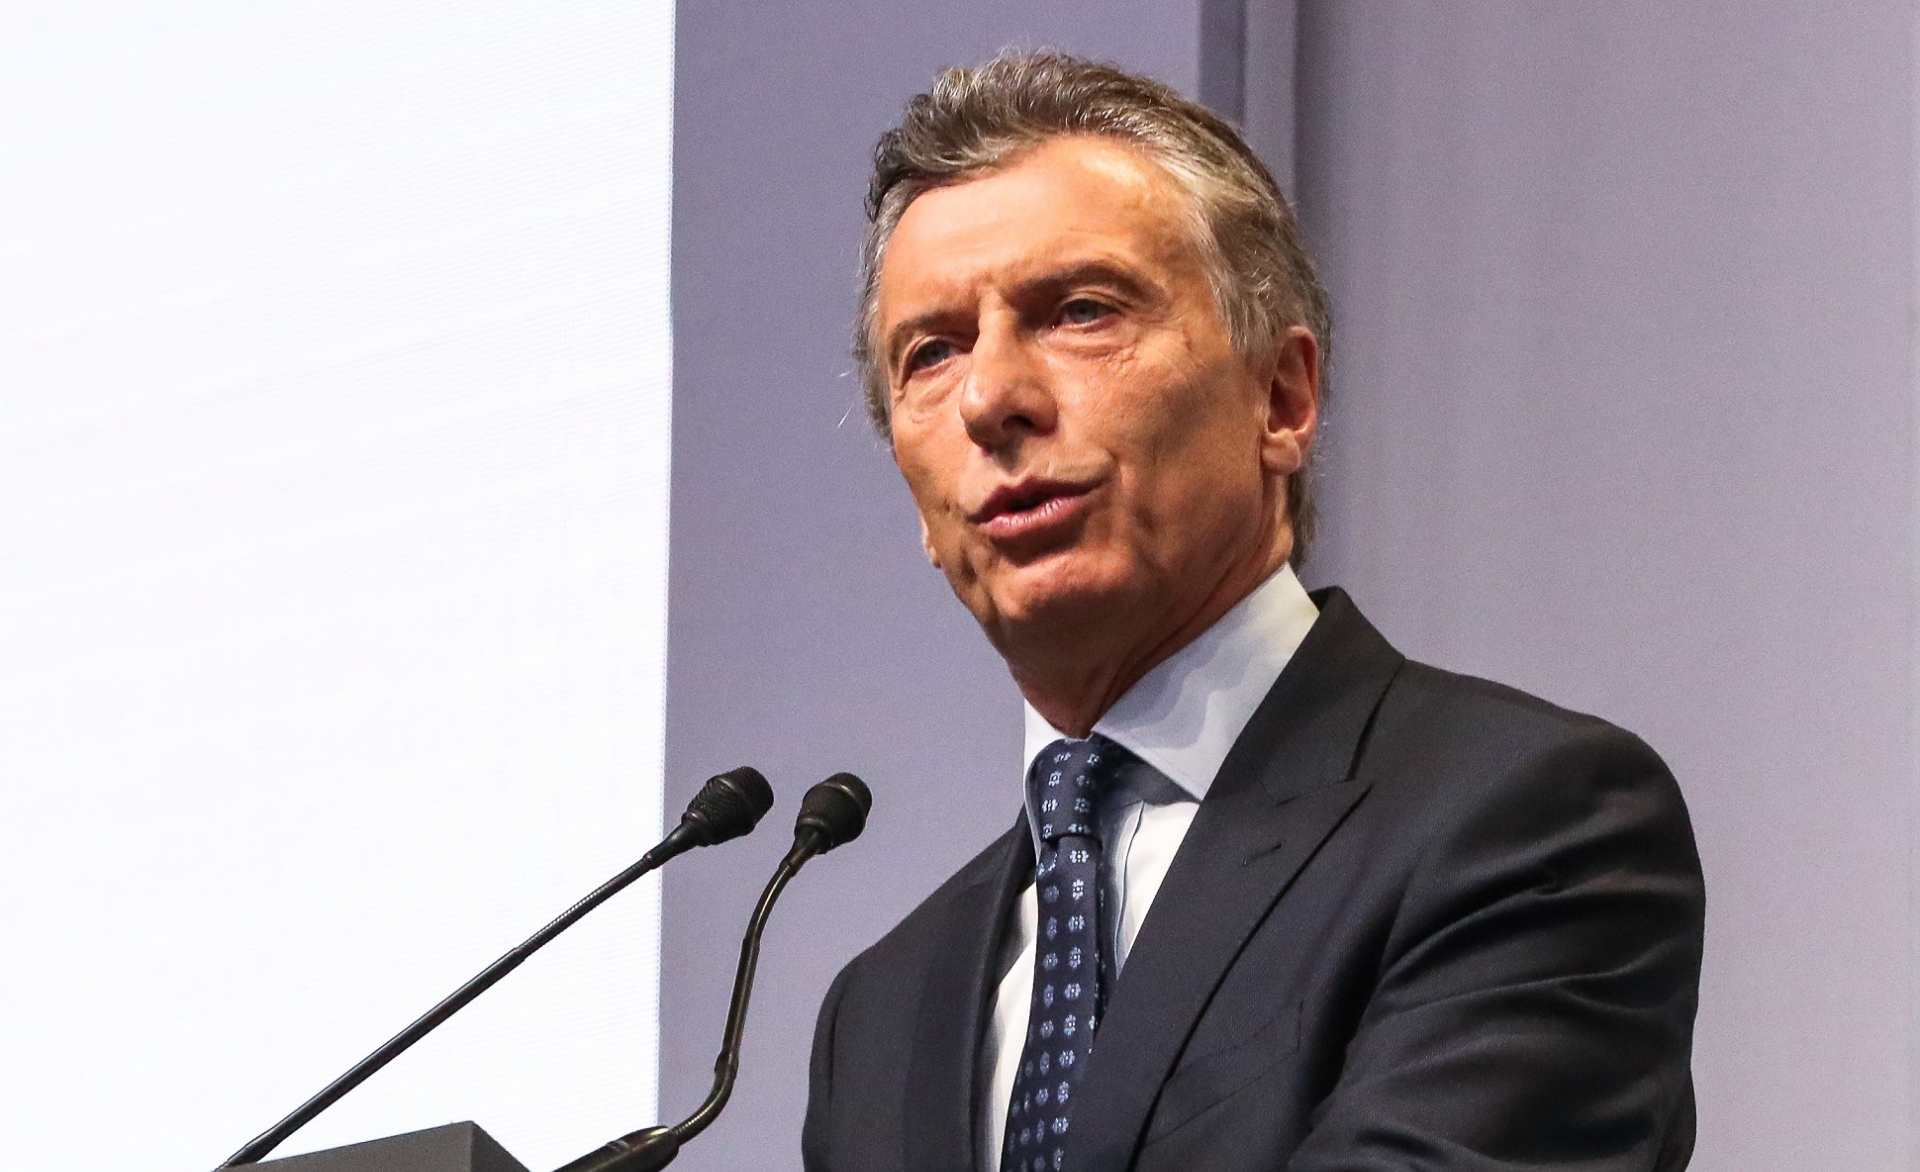 President Mauricio Macri at the UN Conference on South-South Cooperation: “Cooperation is a great tool to promote horizontal links between countries at different levels of development”